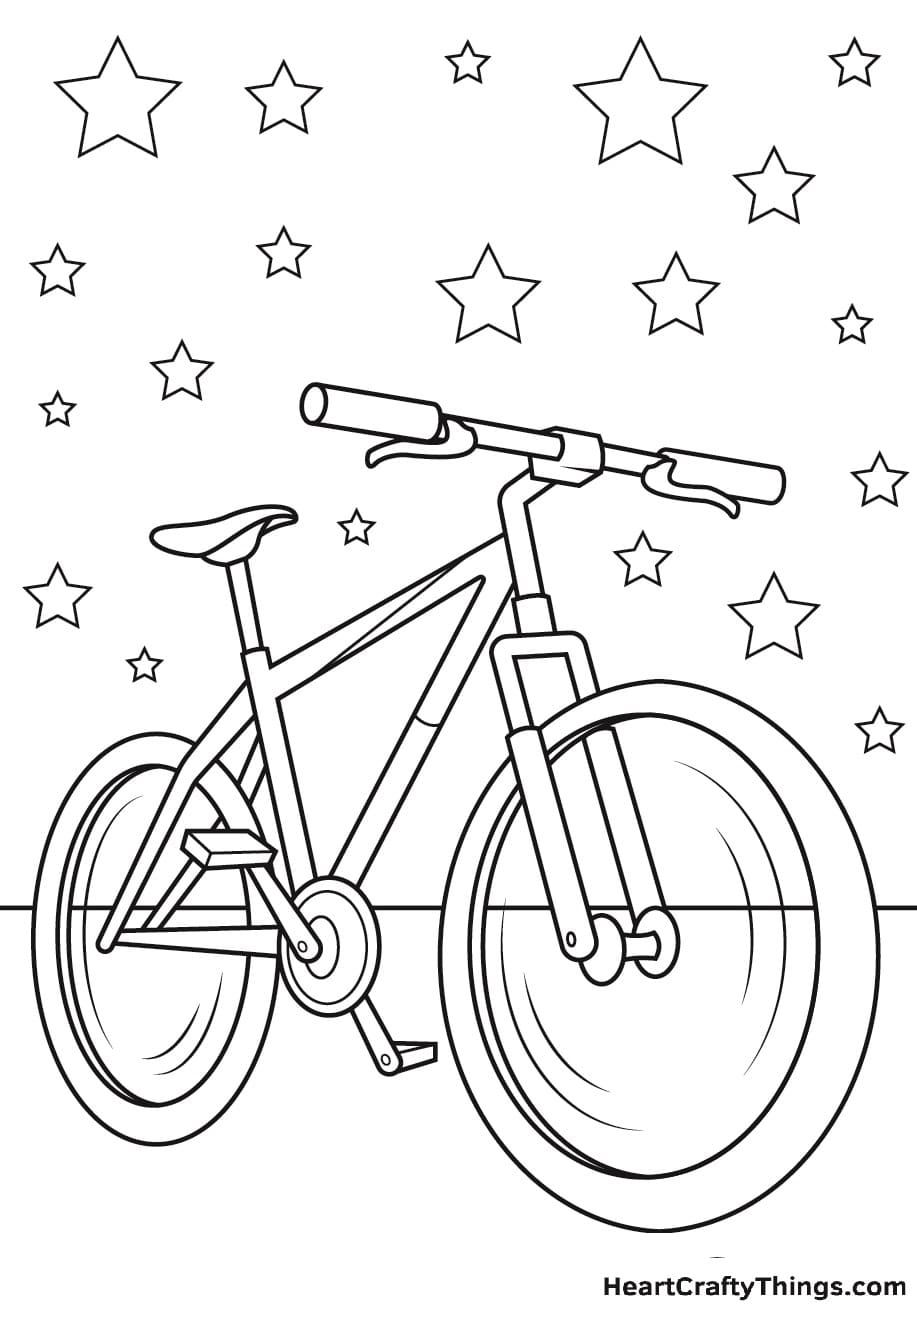 Bicycles Image Coloring Page